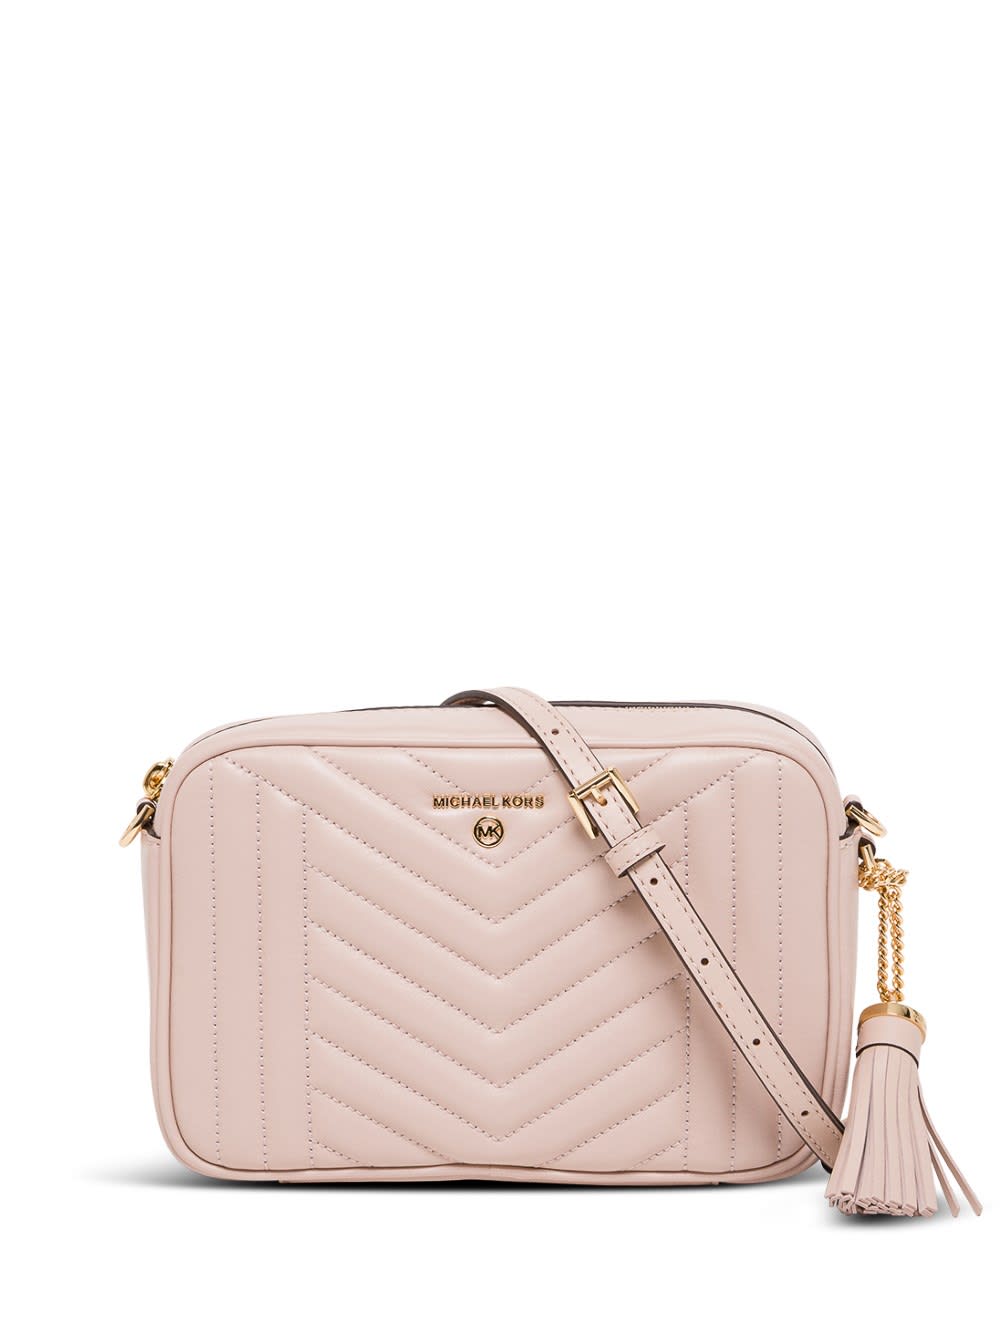 Michael Kors Jet Set Charm Crossbody Bag In Quilted Leather